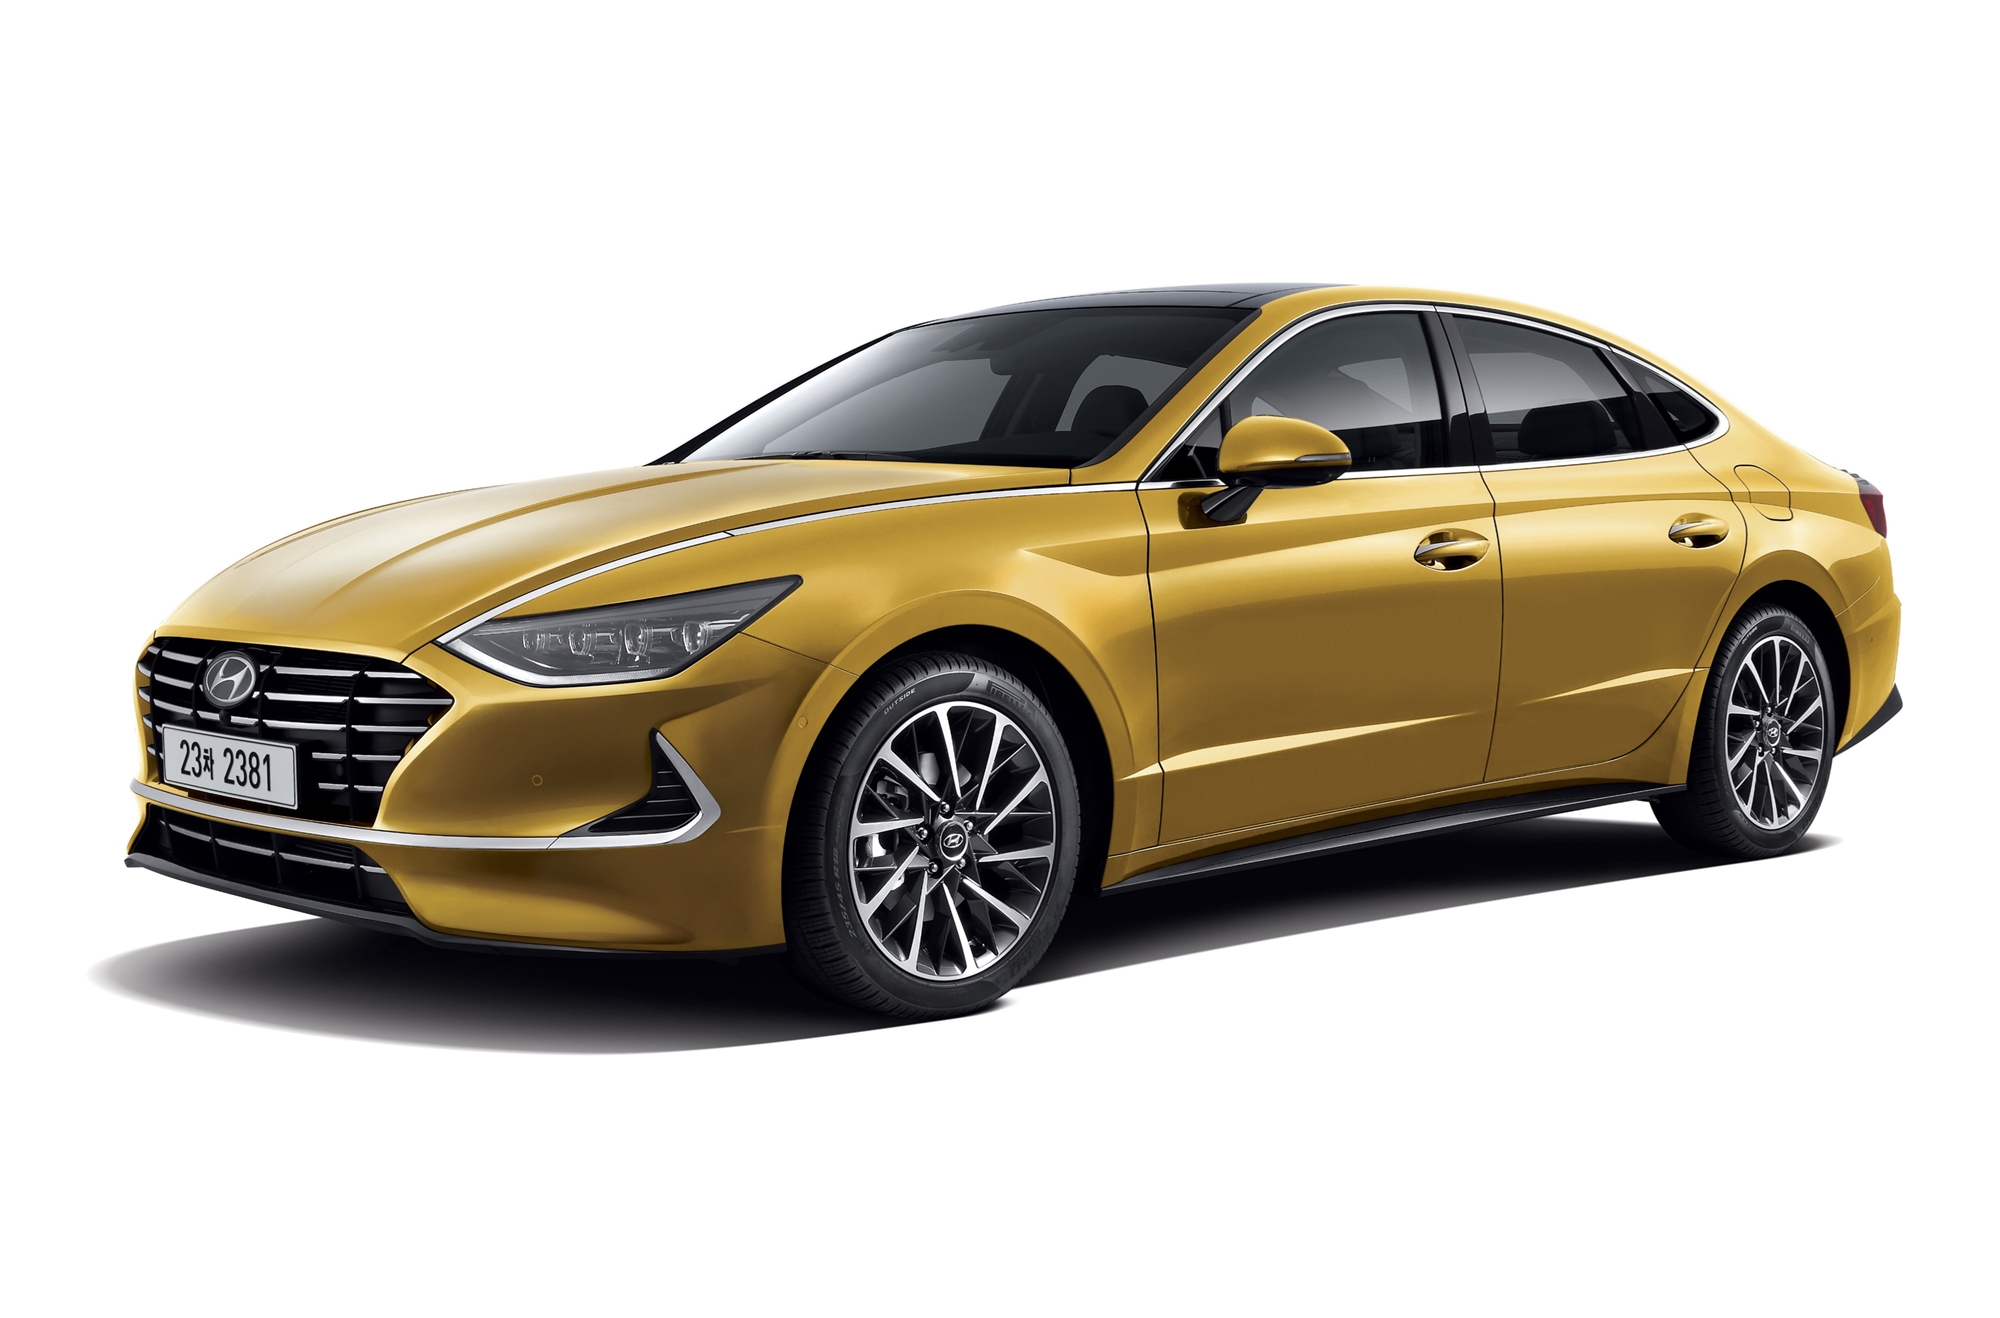 2022 Hyundai Sonata N Line Full Specs, Features and Price | CarBuzz